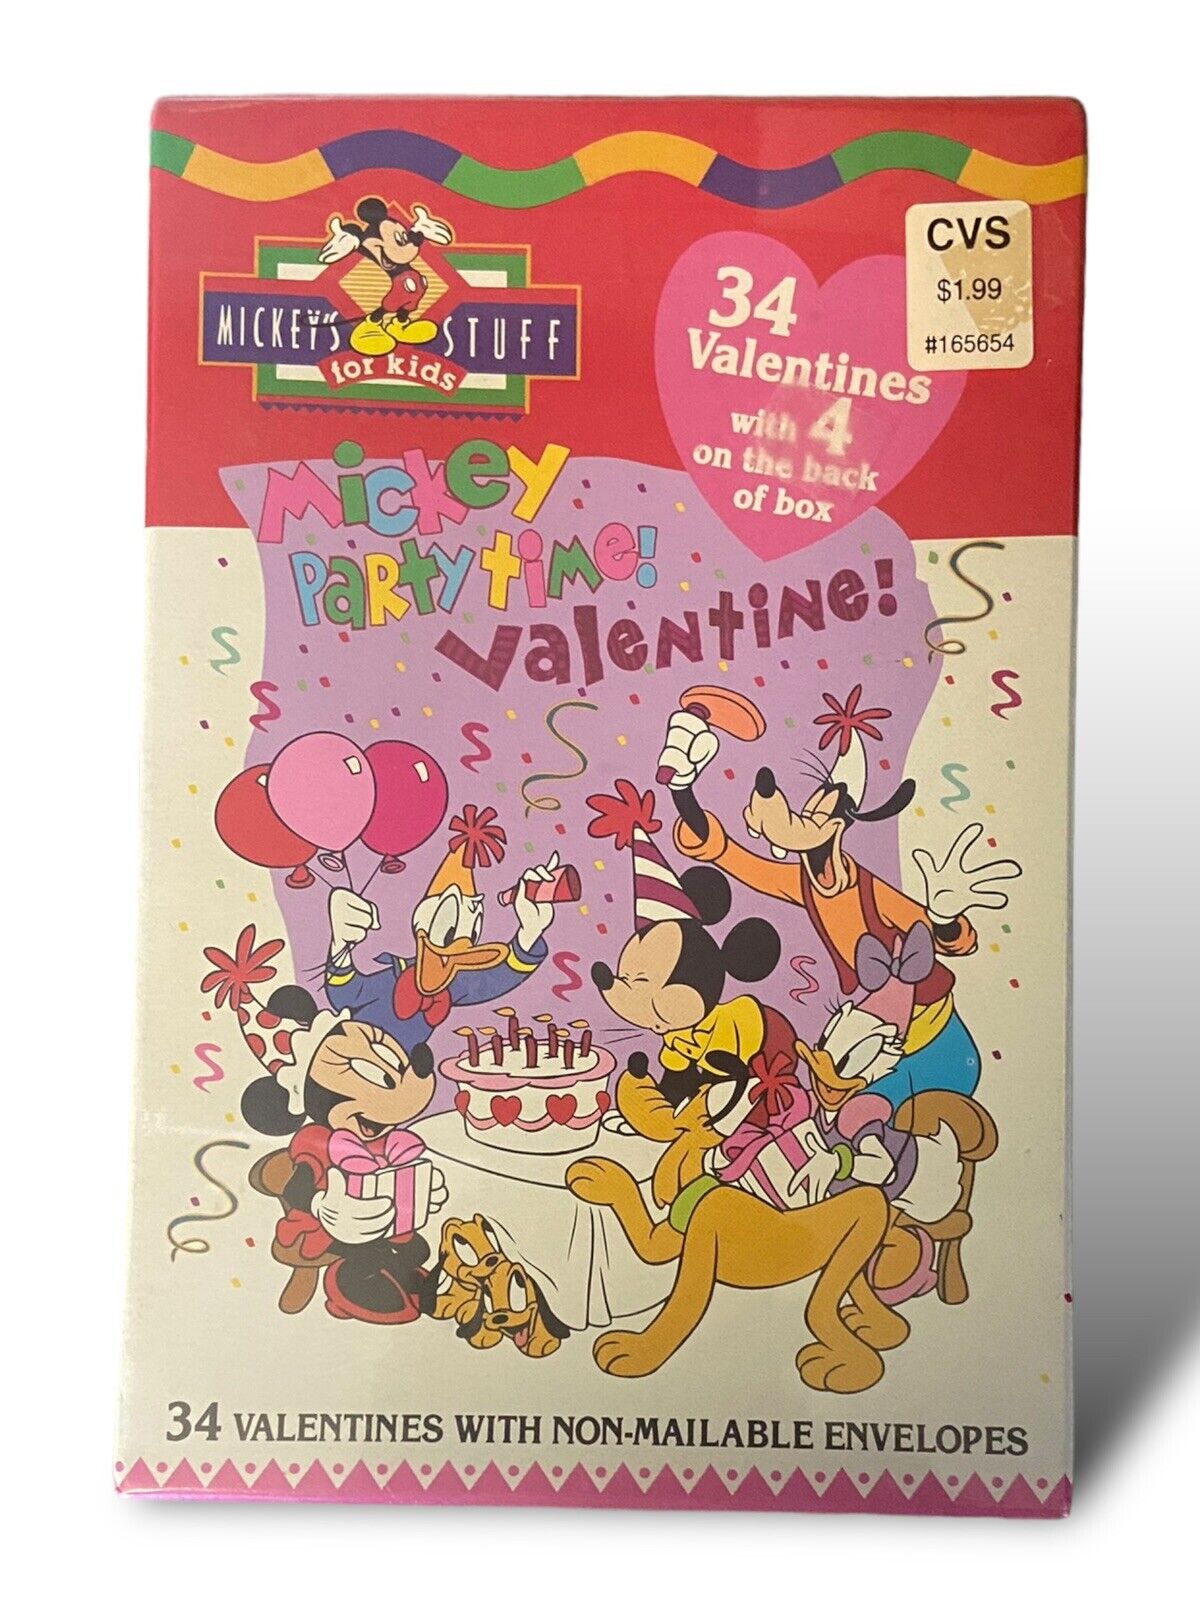 Vintage Disney Box Of 34 Mickey Mouse Party Time Valentine\'s Cards and Envelopes